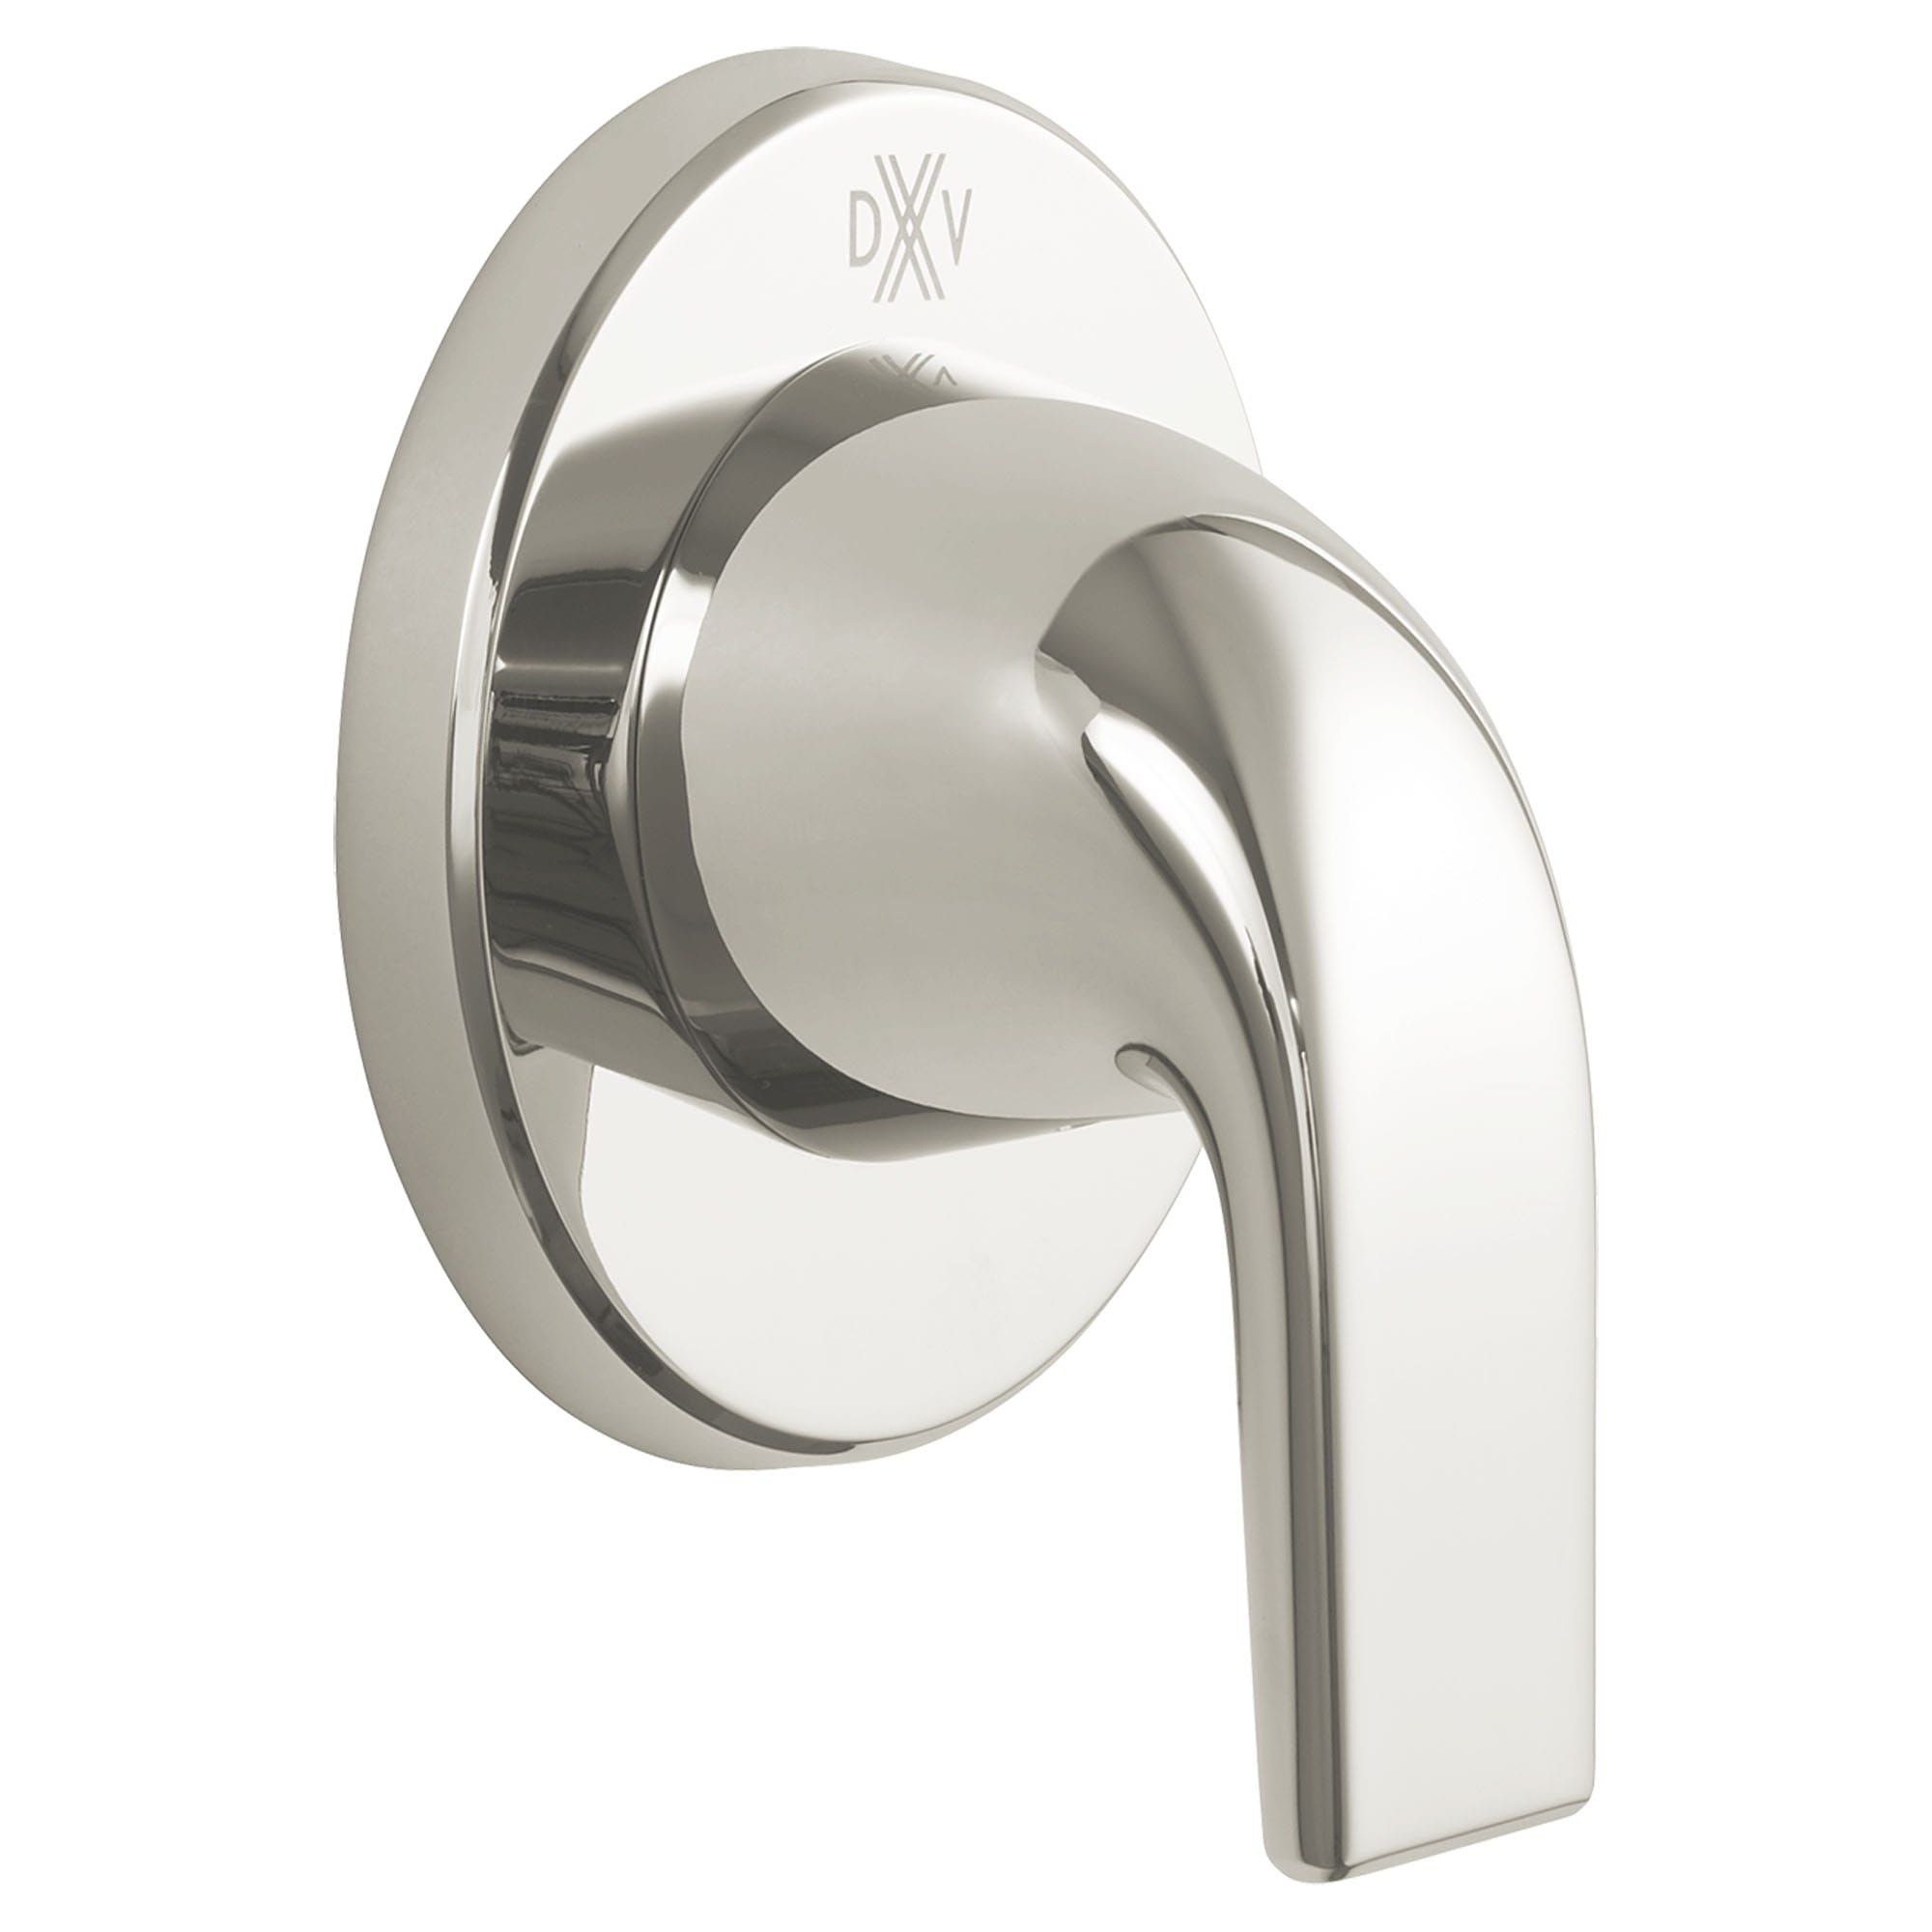 DXV Modulus 3/2 or 4/3 Diverter Valve Trim Only with Lever Handle